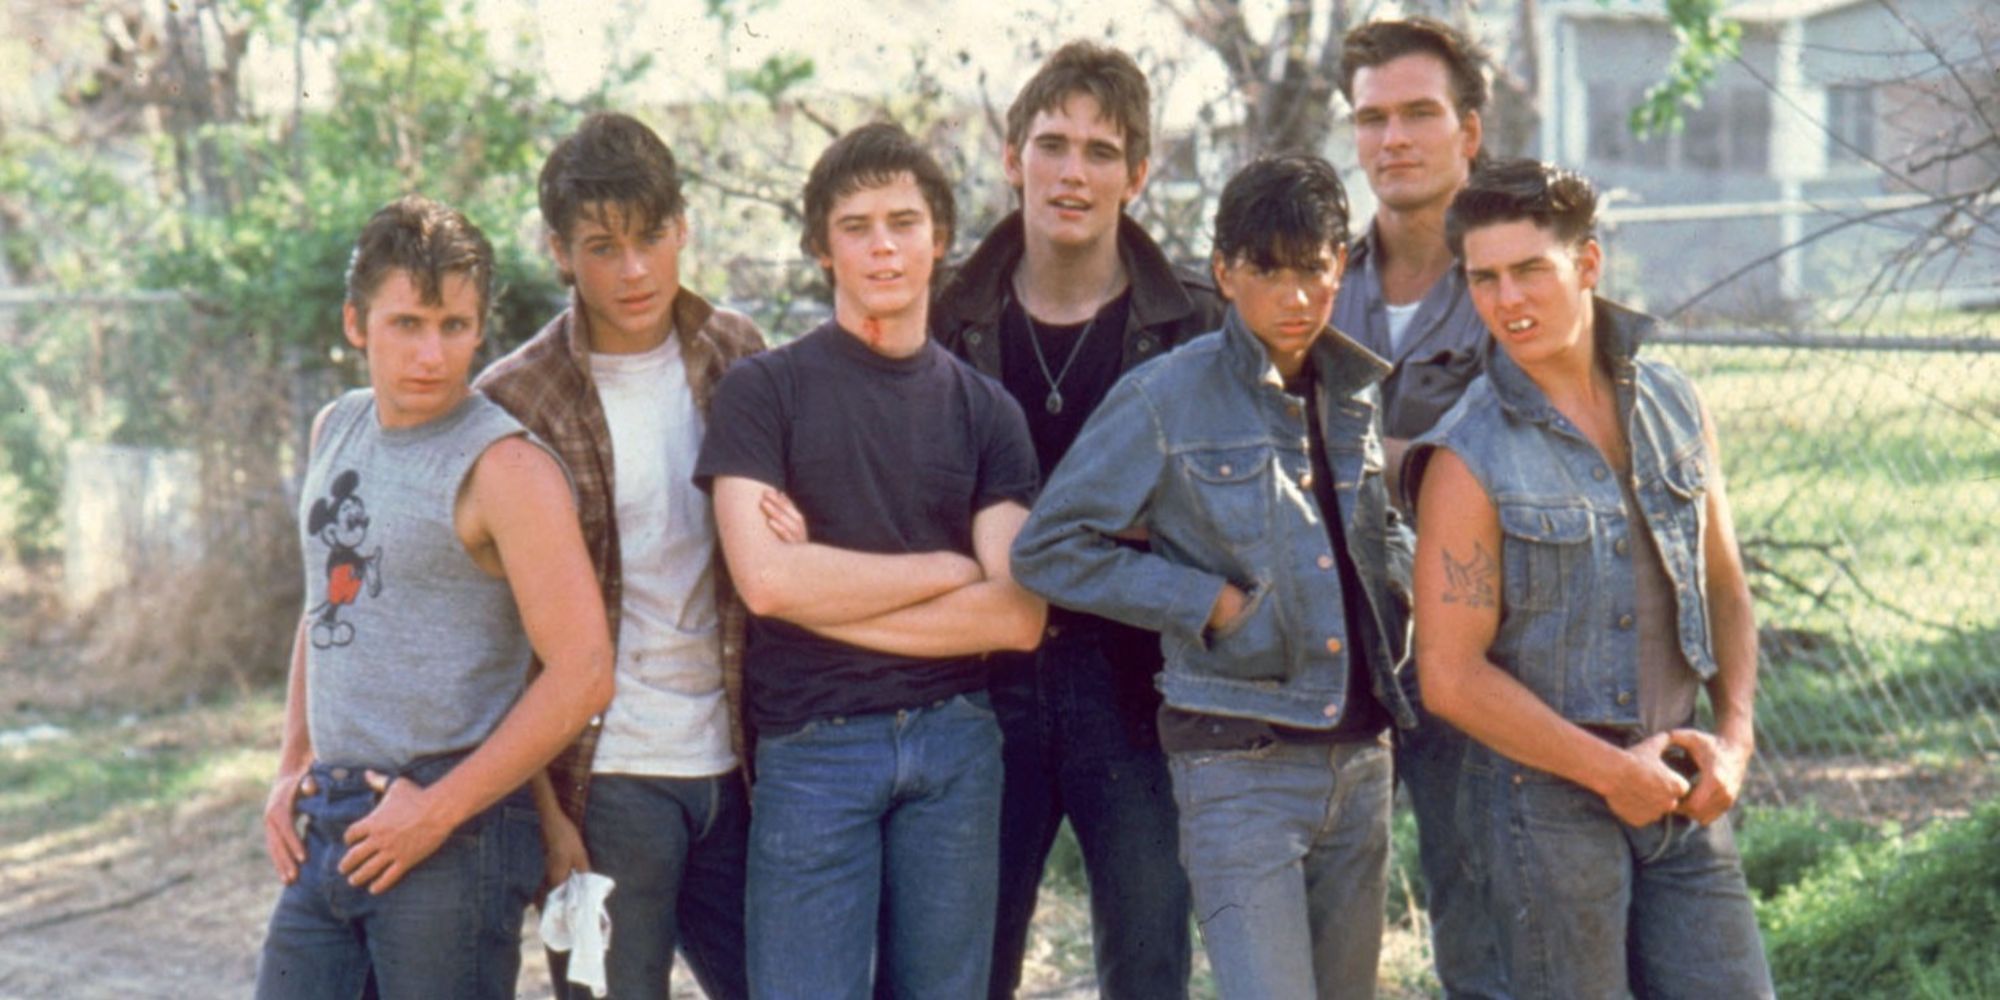 The cast of The Outsiders standing close together outside